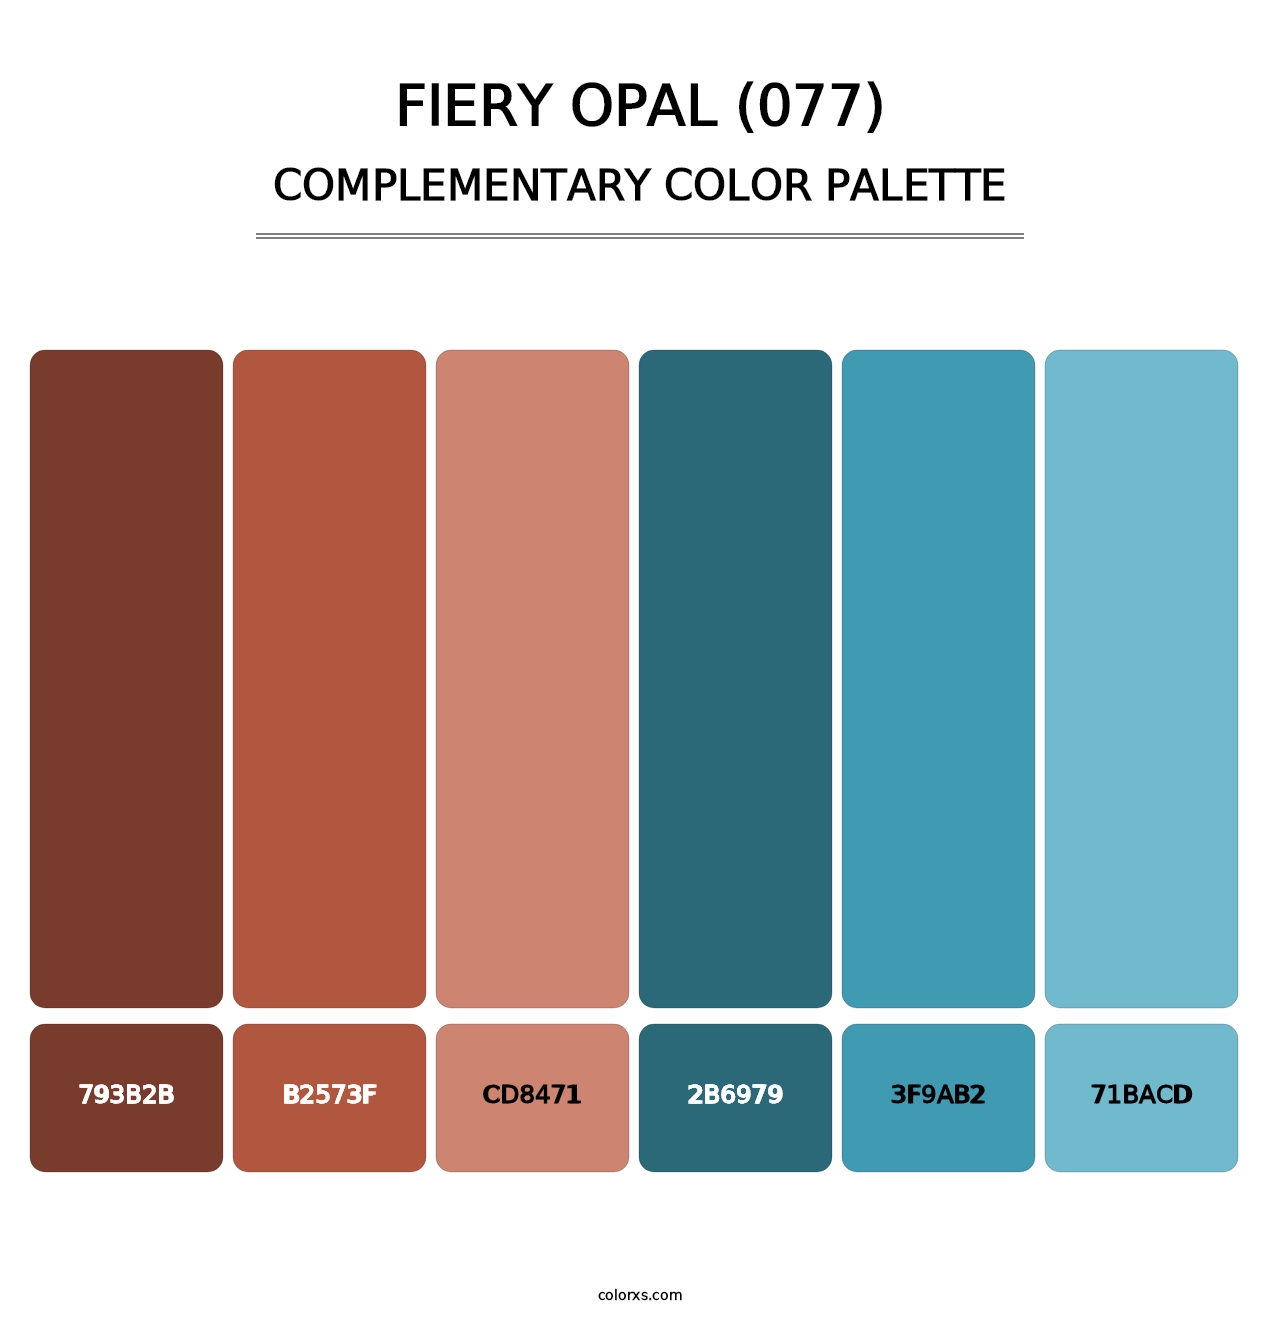 Fiery Opal (077) - Complementary Color Palette